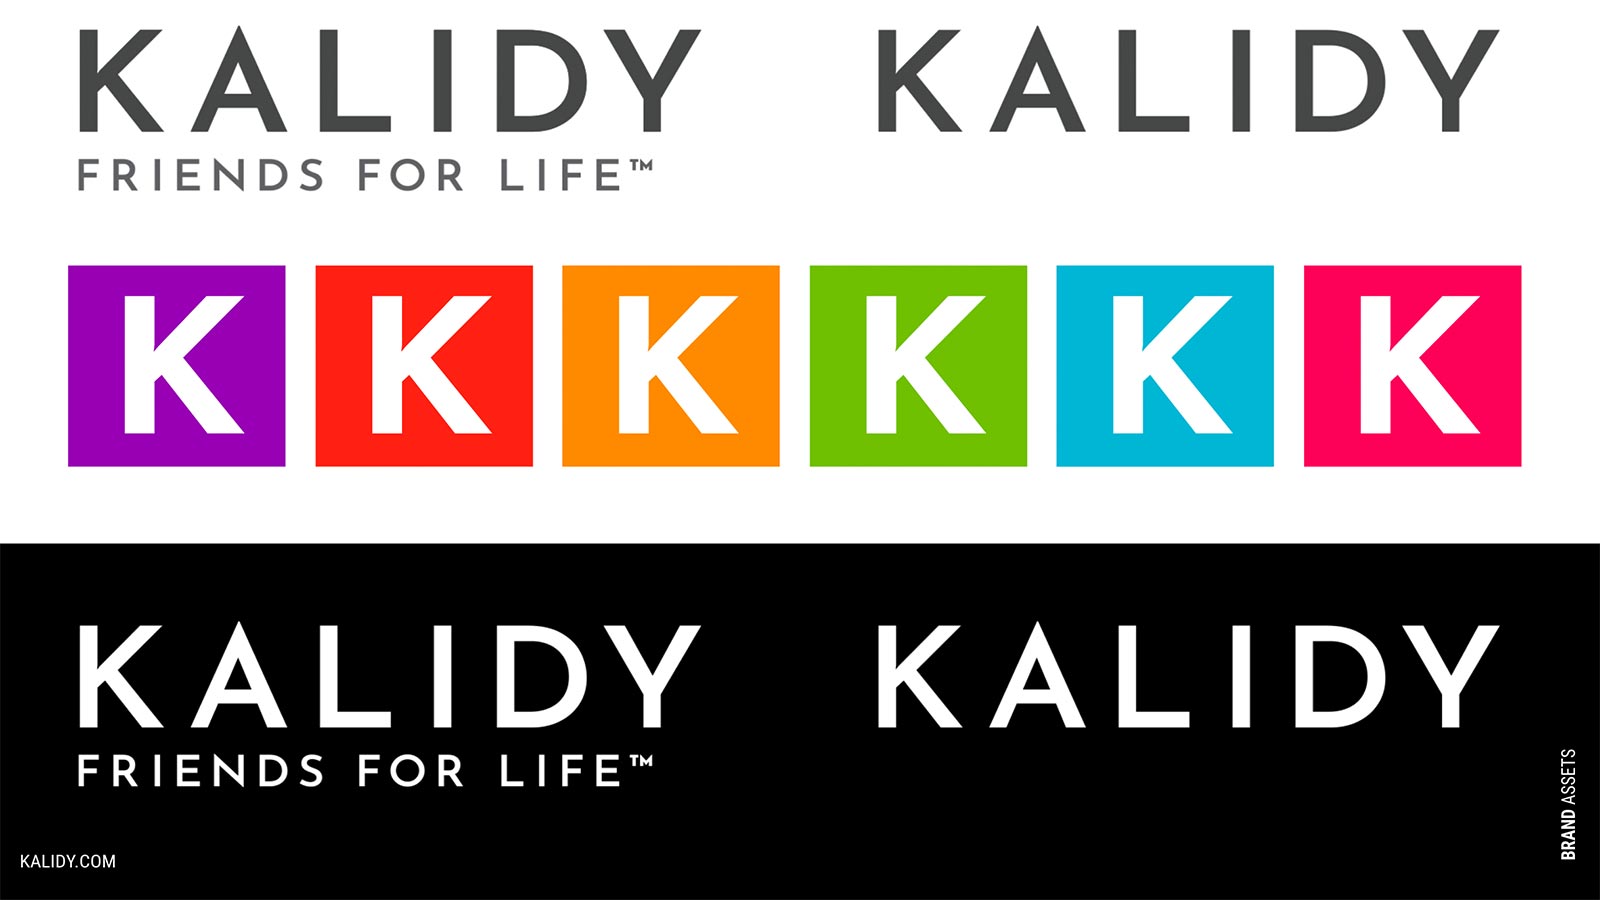 Brand guide for Kalidy homes